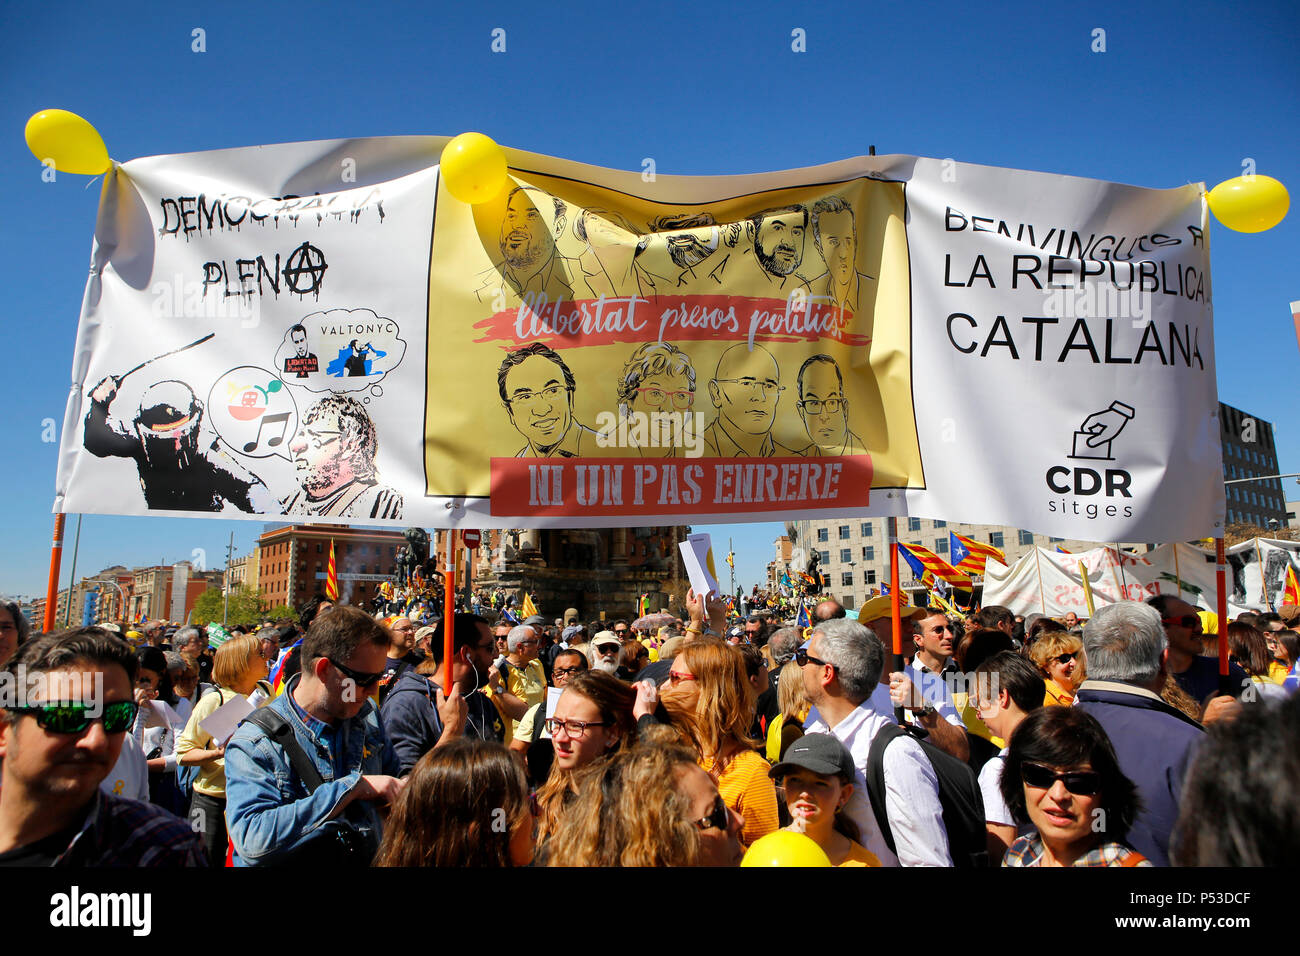 Barcelona,   Spain - More than half a million people in a peaceful demonstration for the independence of Catalonia Stock Photo